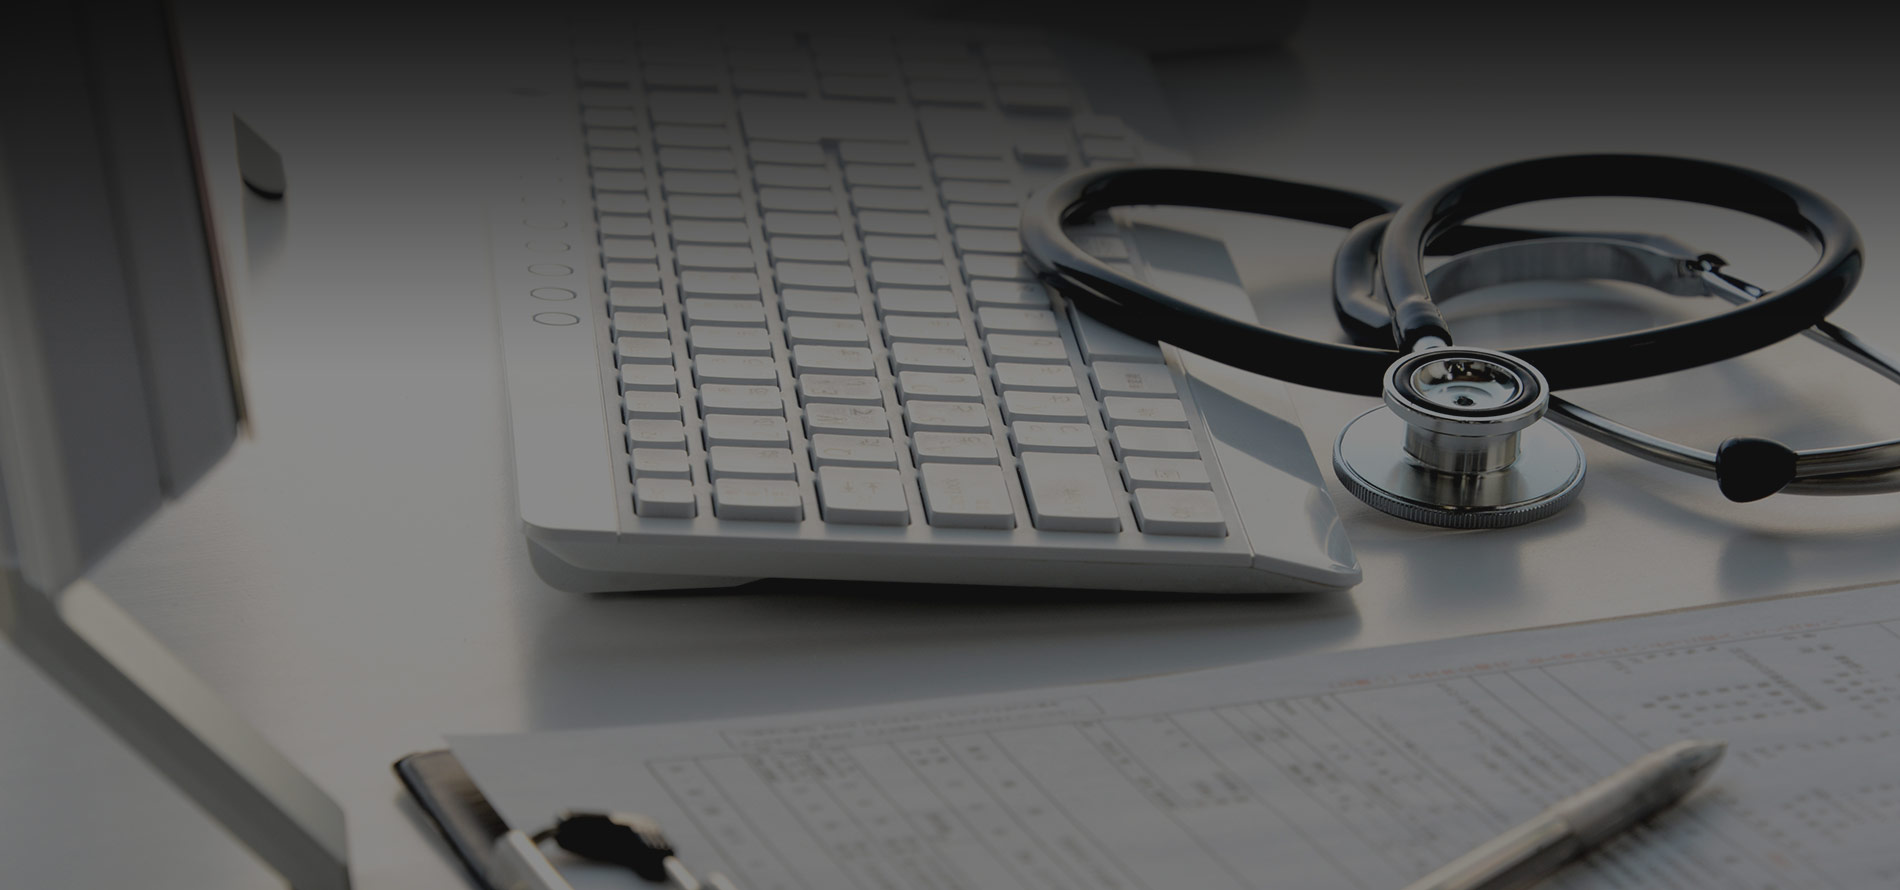 a keyboard and stethoscope in a medical office